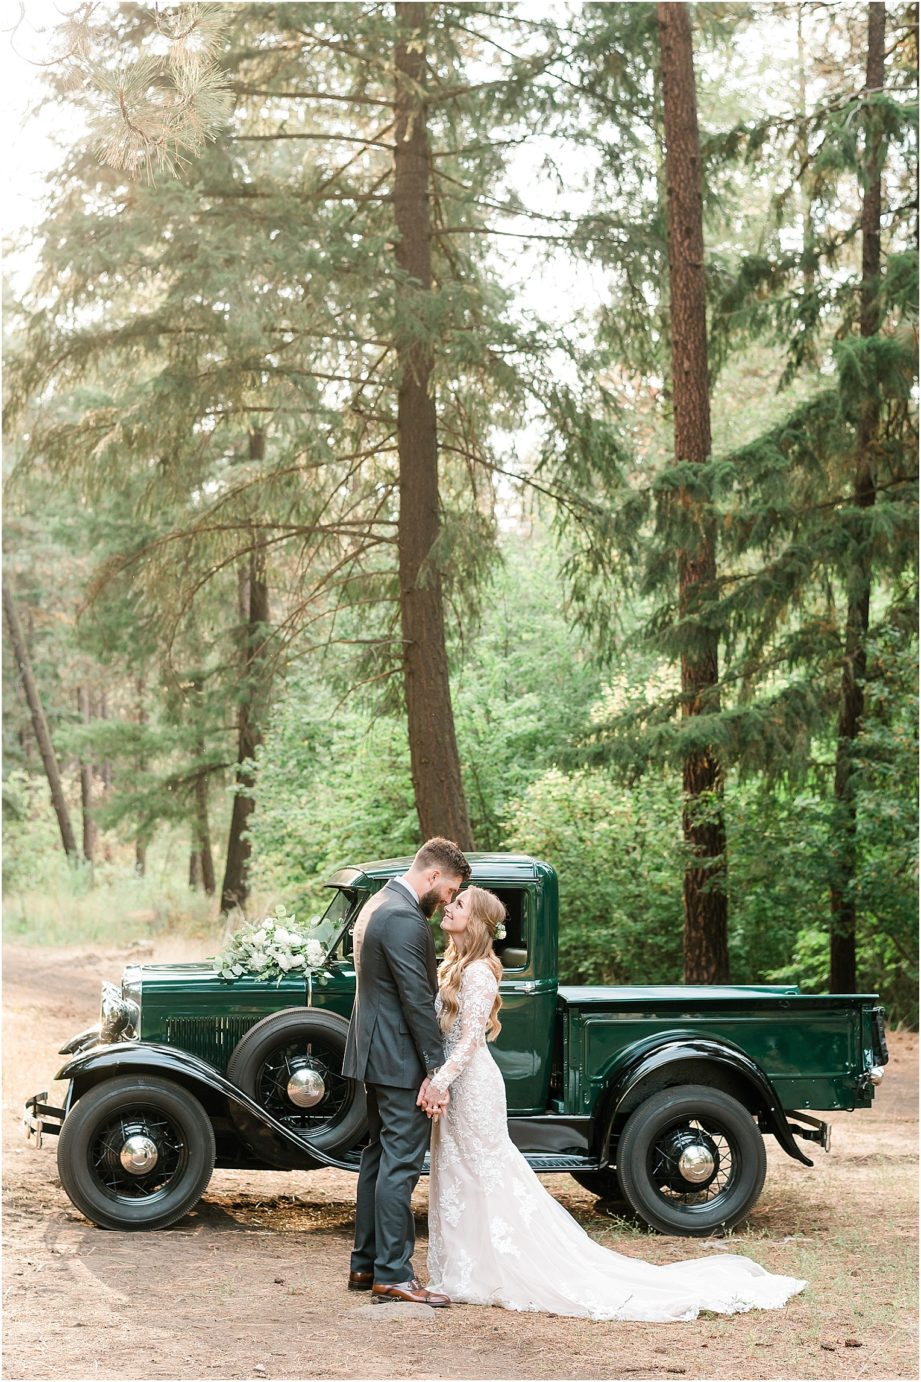 Classy Cabin Wedding Naches Photographer Travis and Arianna bride and groom portraits